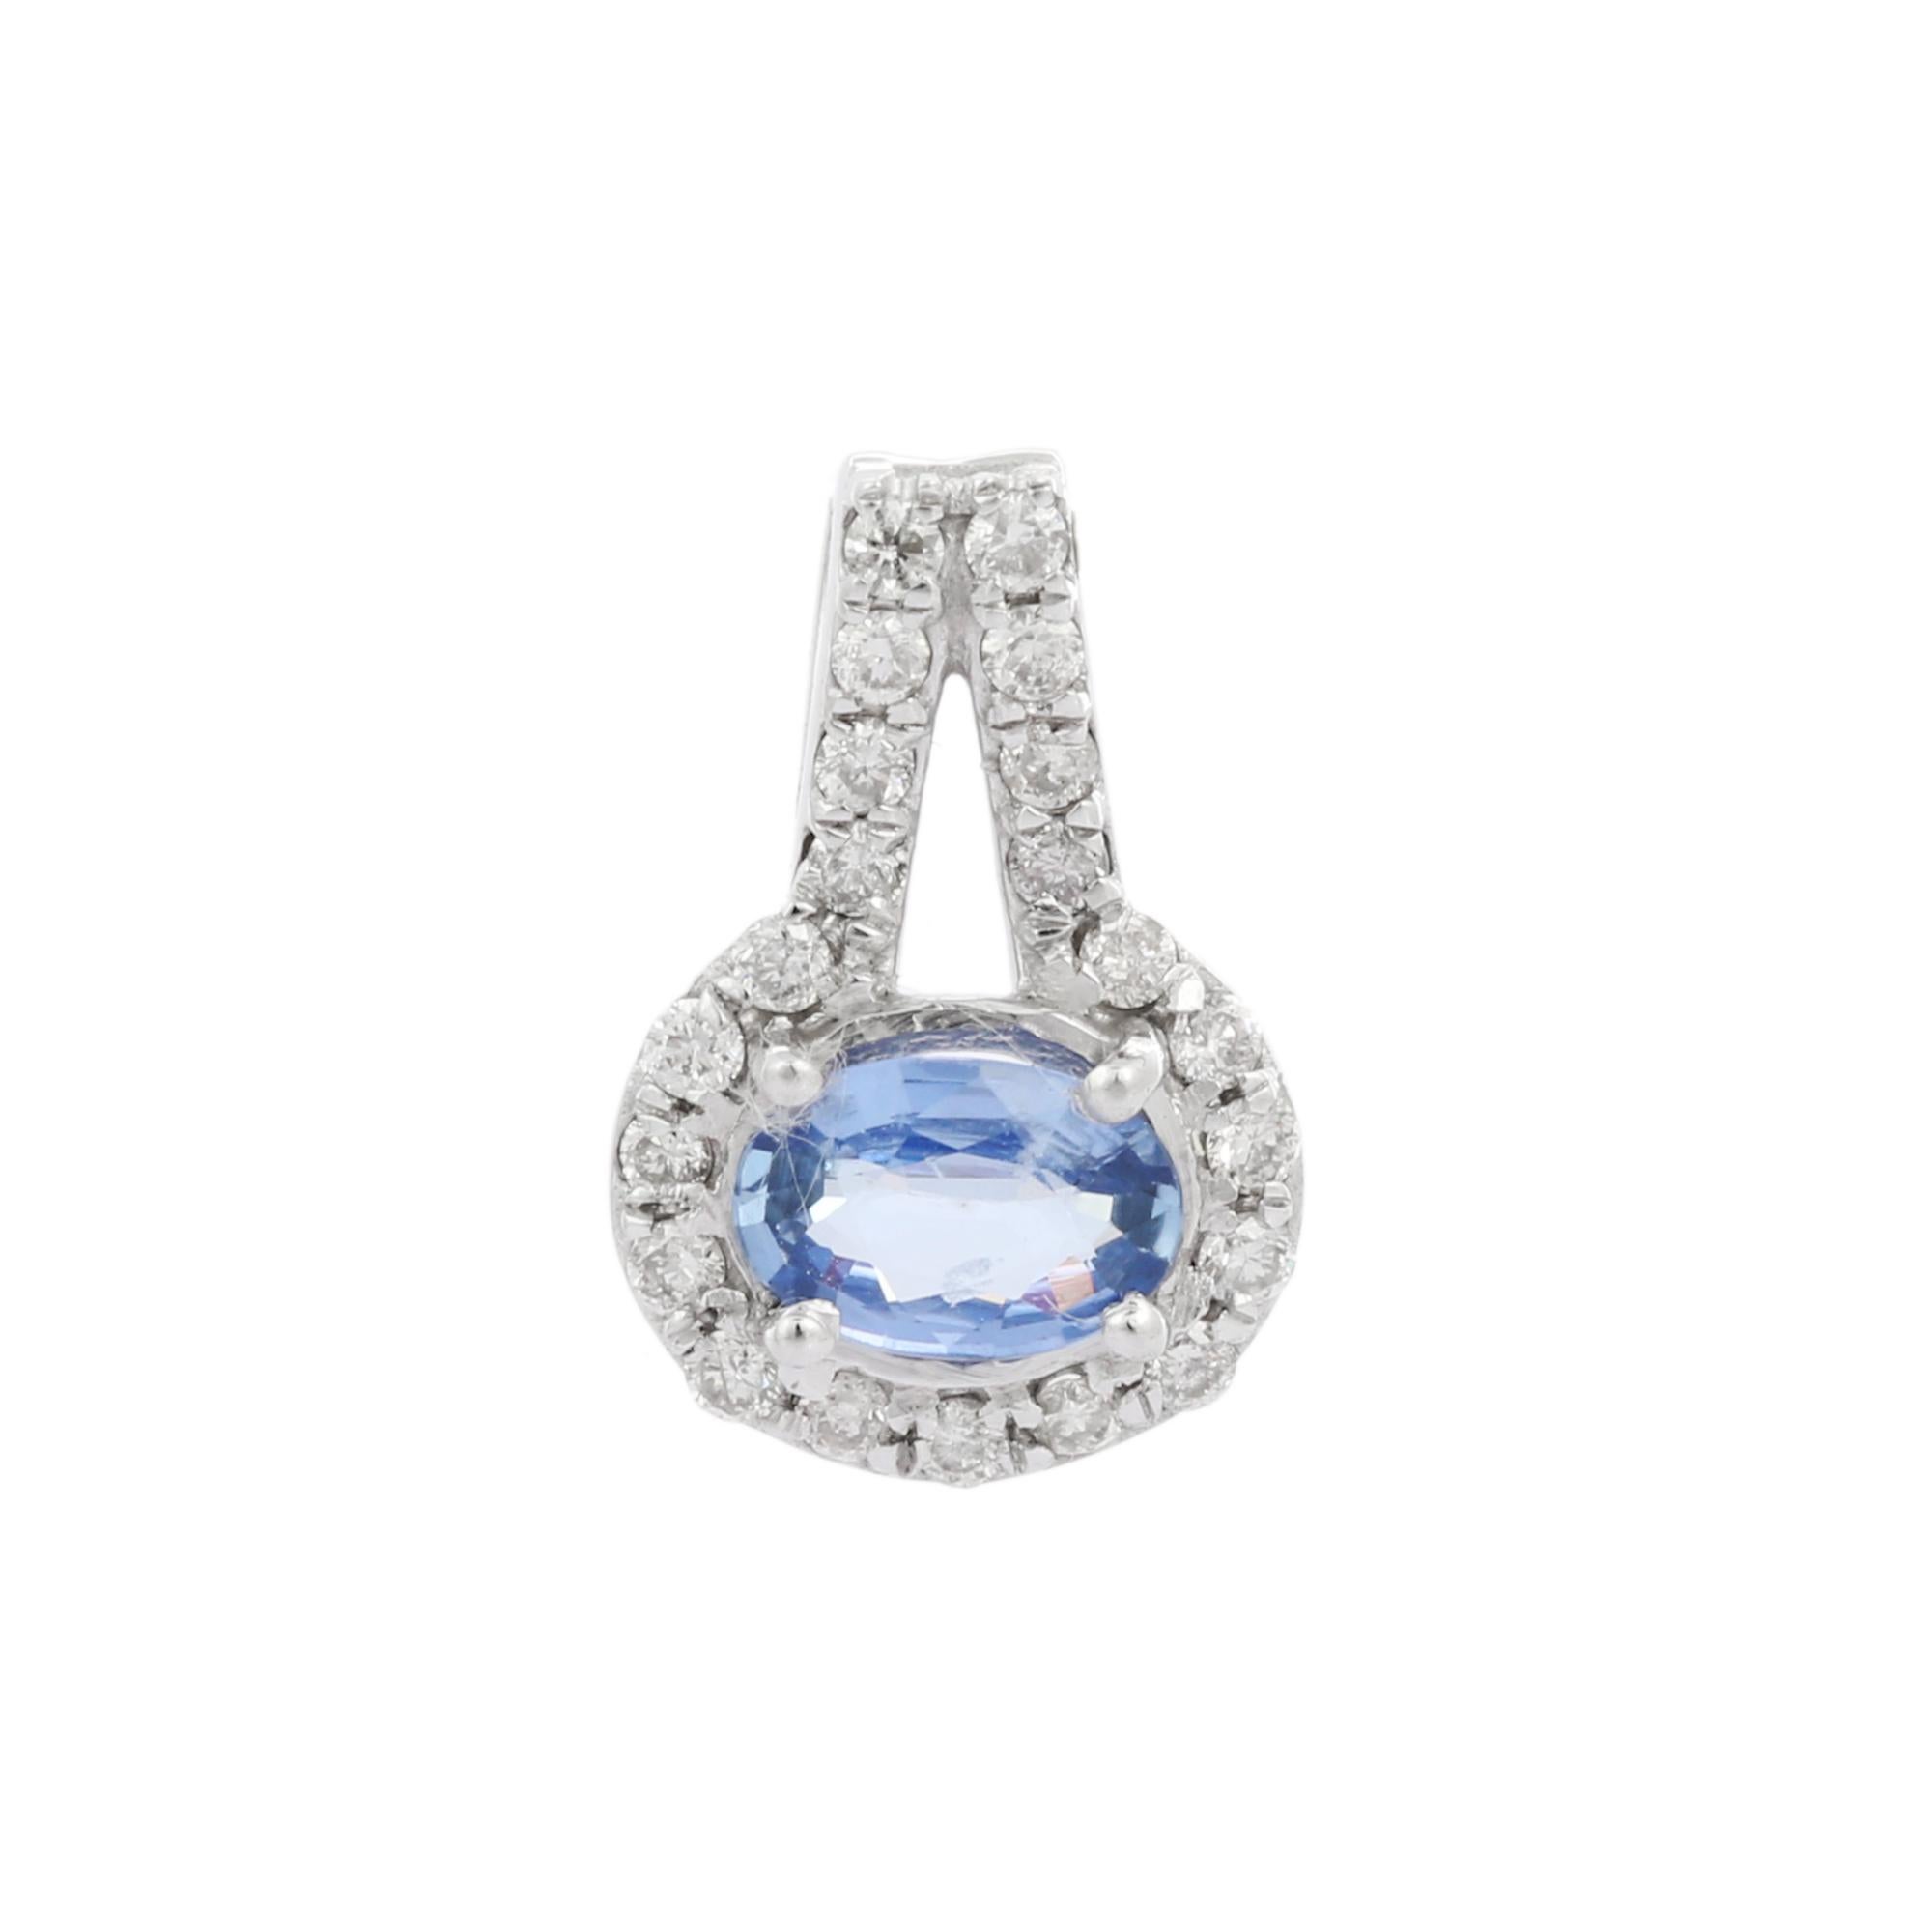 Natural Blue Sapphire pendant in 14K Gold. It has a oval cut sapphire studded with diamonds that completes your look with a decent touch. Pendants are used to wear or gifted to represent love and promises. It's an attractive jewelry piece that goes